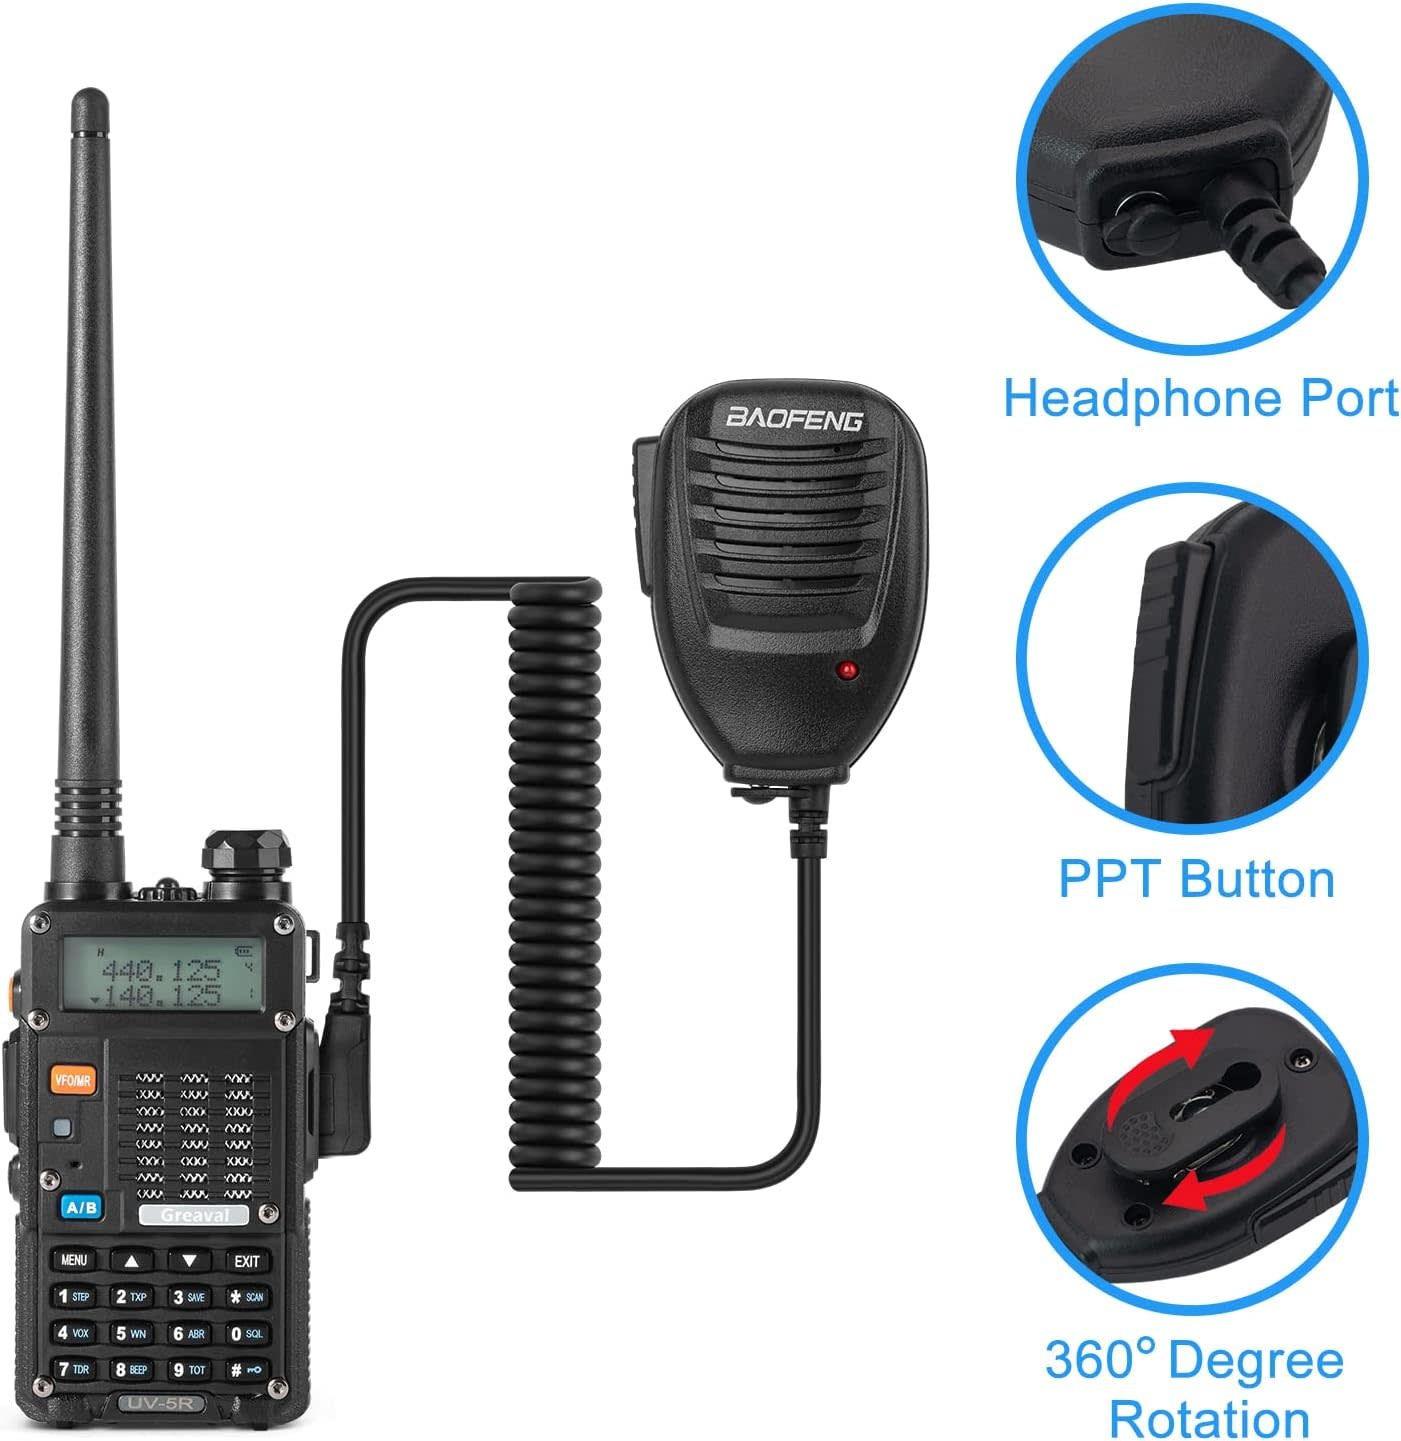 UV-5R-8W Greaval Ham Radio Handheld (UV-5R 8W) Dual Band 2-Way Radio  with Rechargeable 1800mAh Battery Handheld Walkie Talkies Complete Set  with Earpiece and Programming Cable (3rd Gen) RadioShack